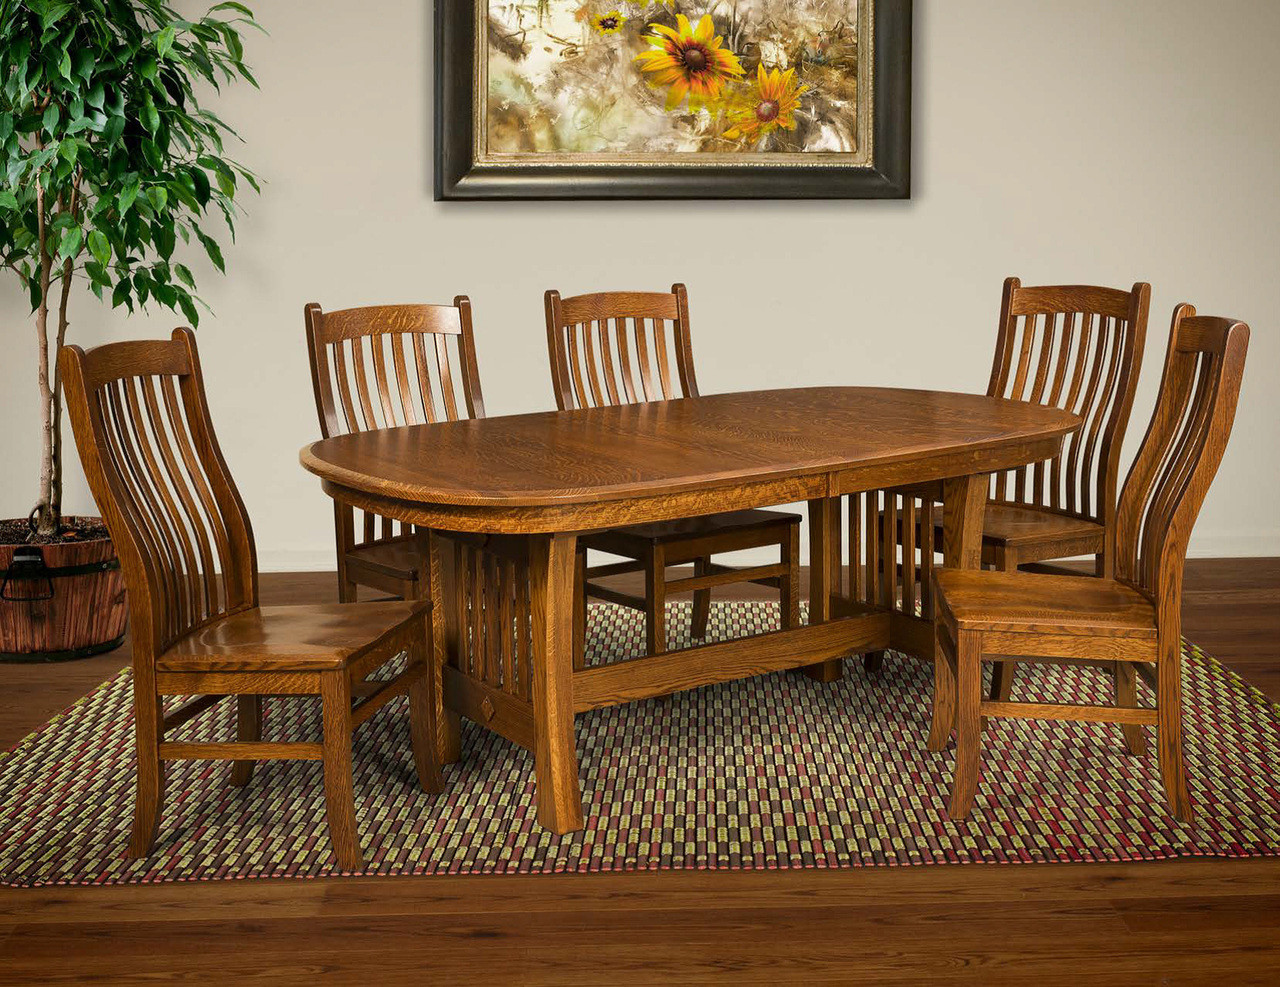 Amish Handcrafted Furniture